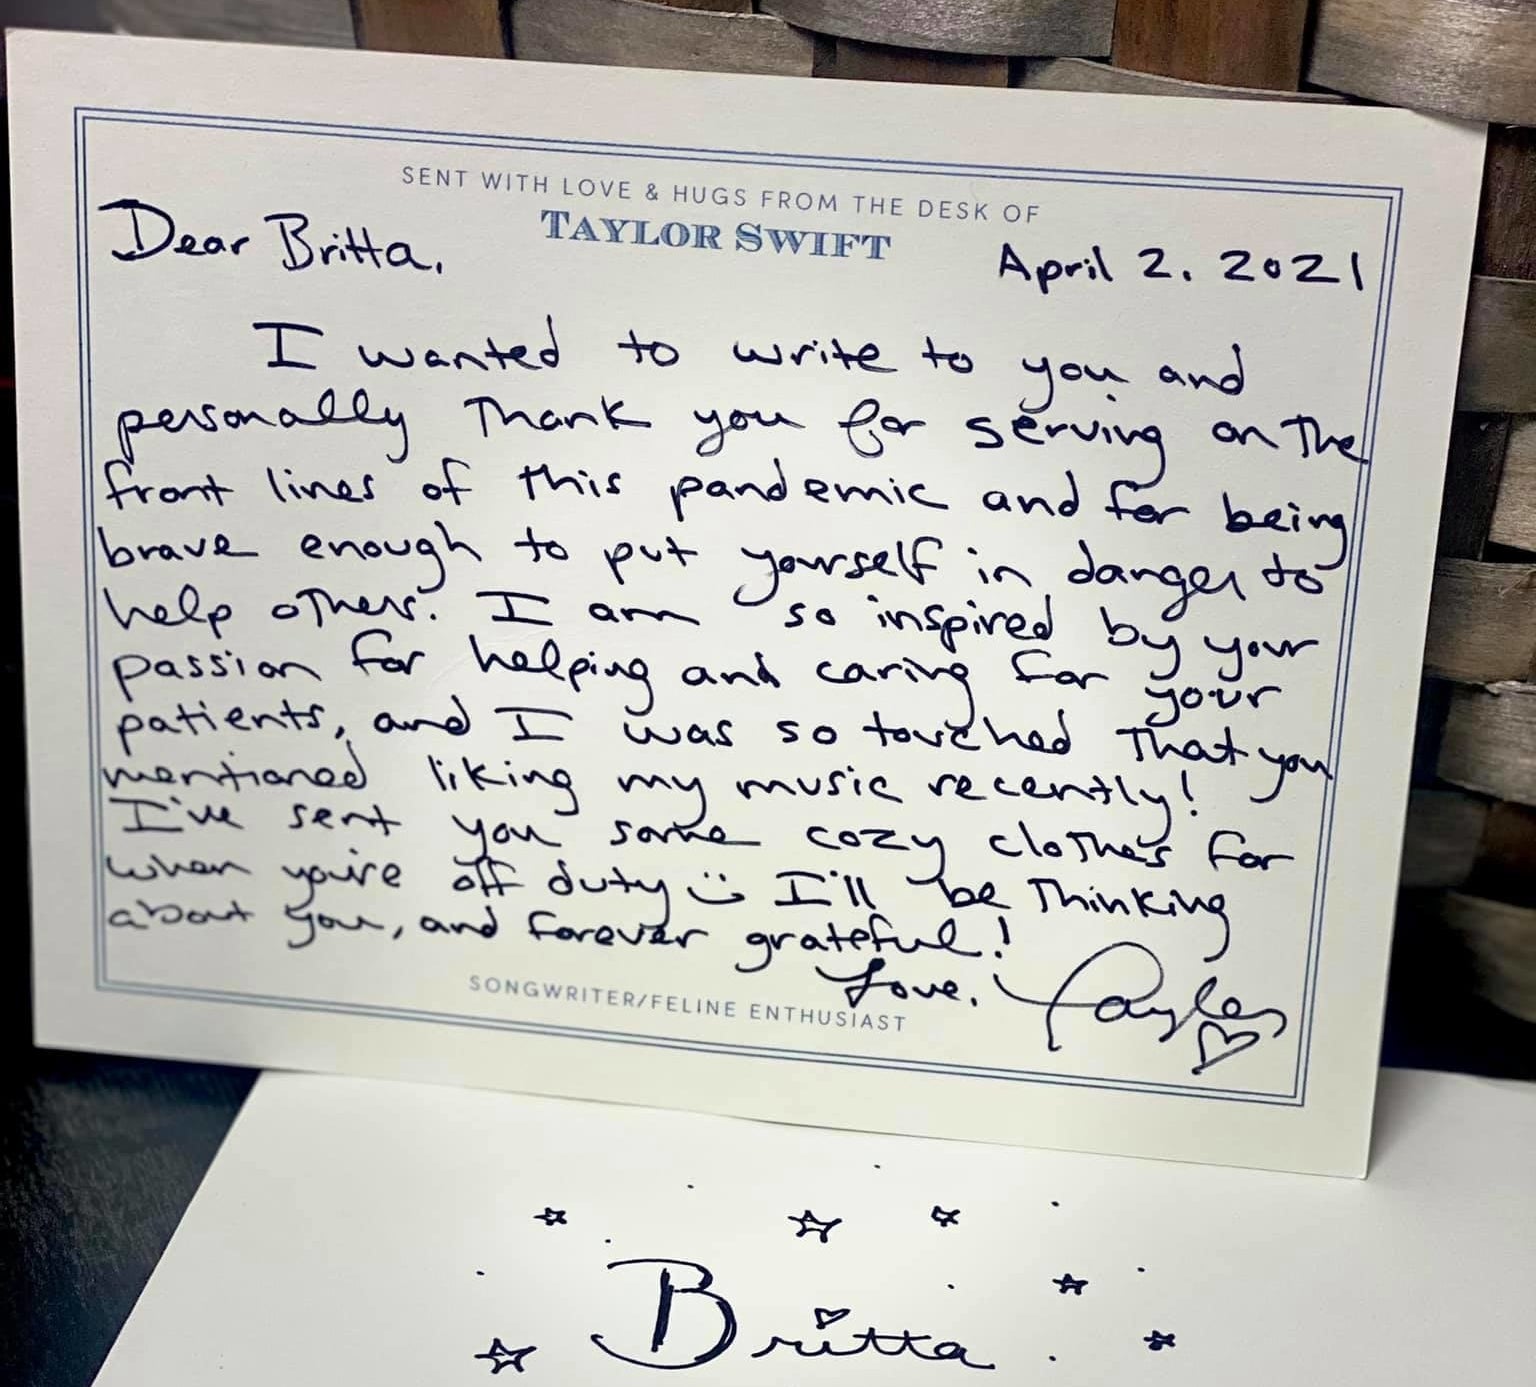 A photo of the note Taylor wrote on her personal stationery